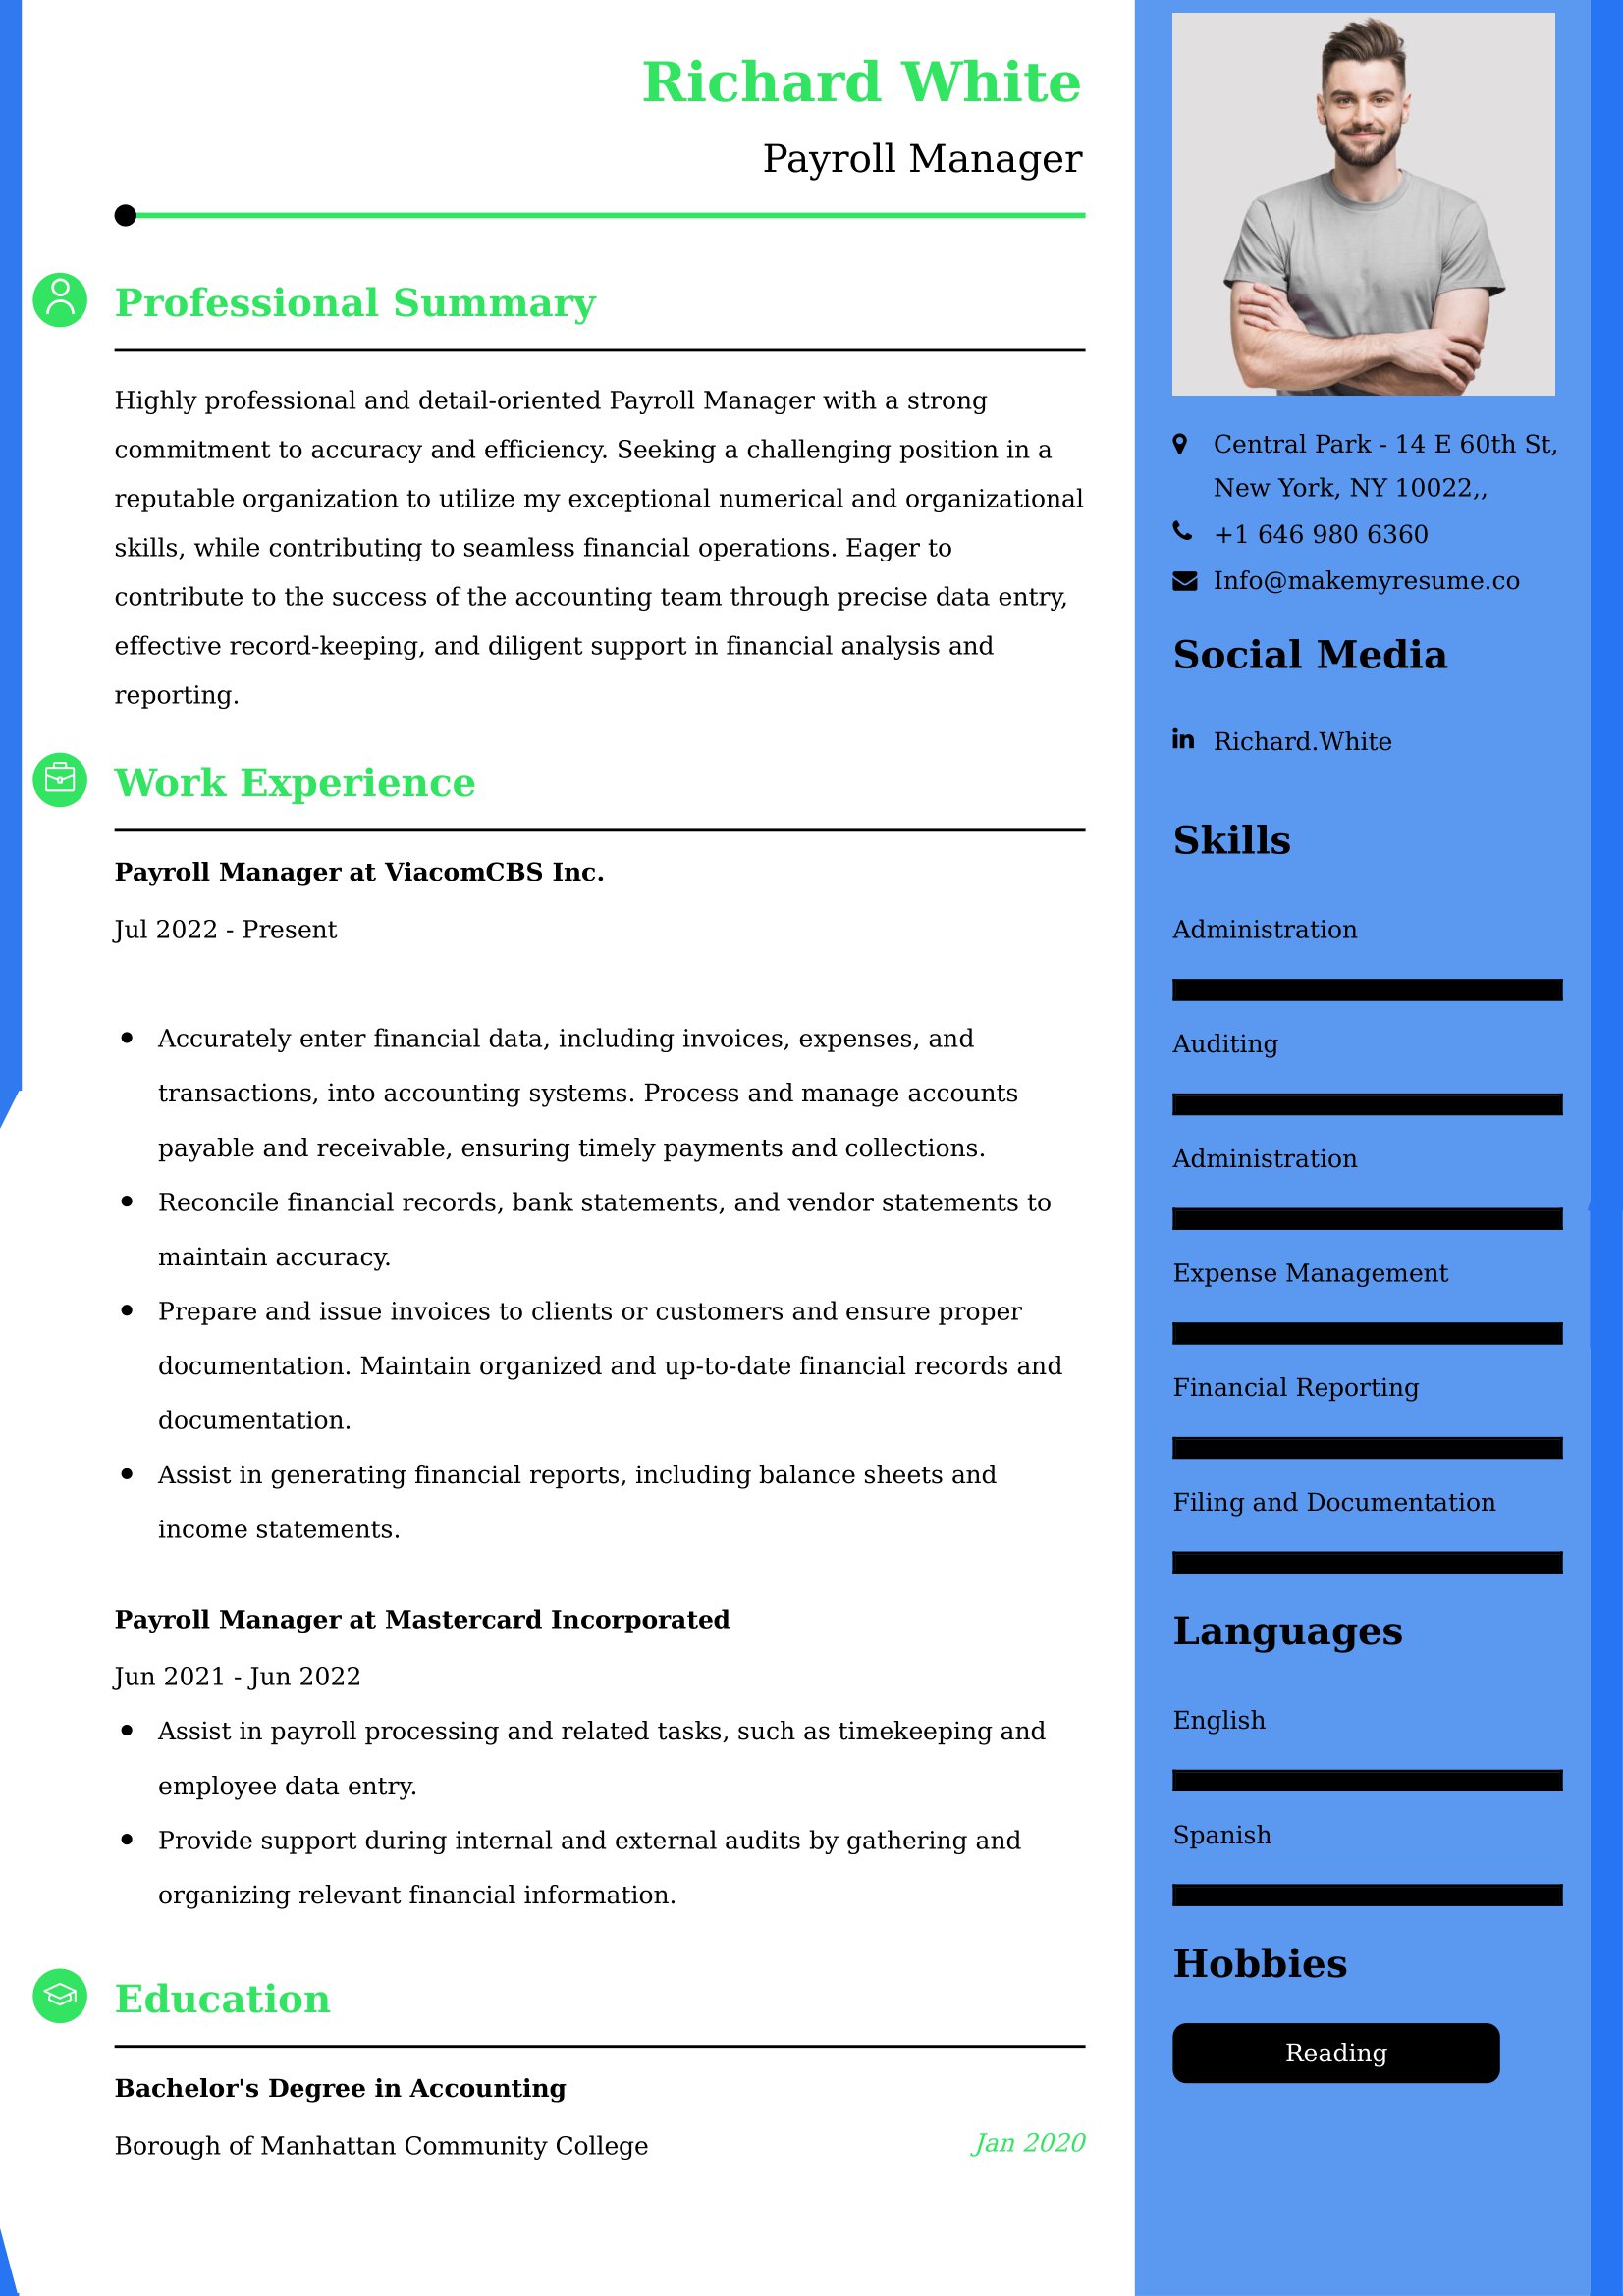 Payroll Manager Resume Examples - Brazilian Format, Latest Template